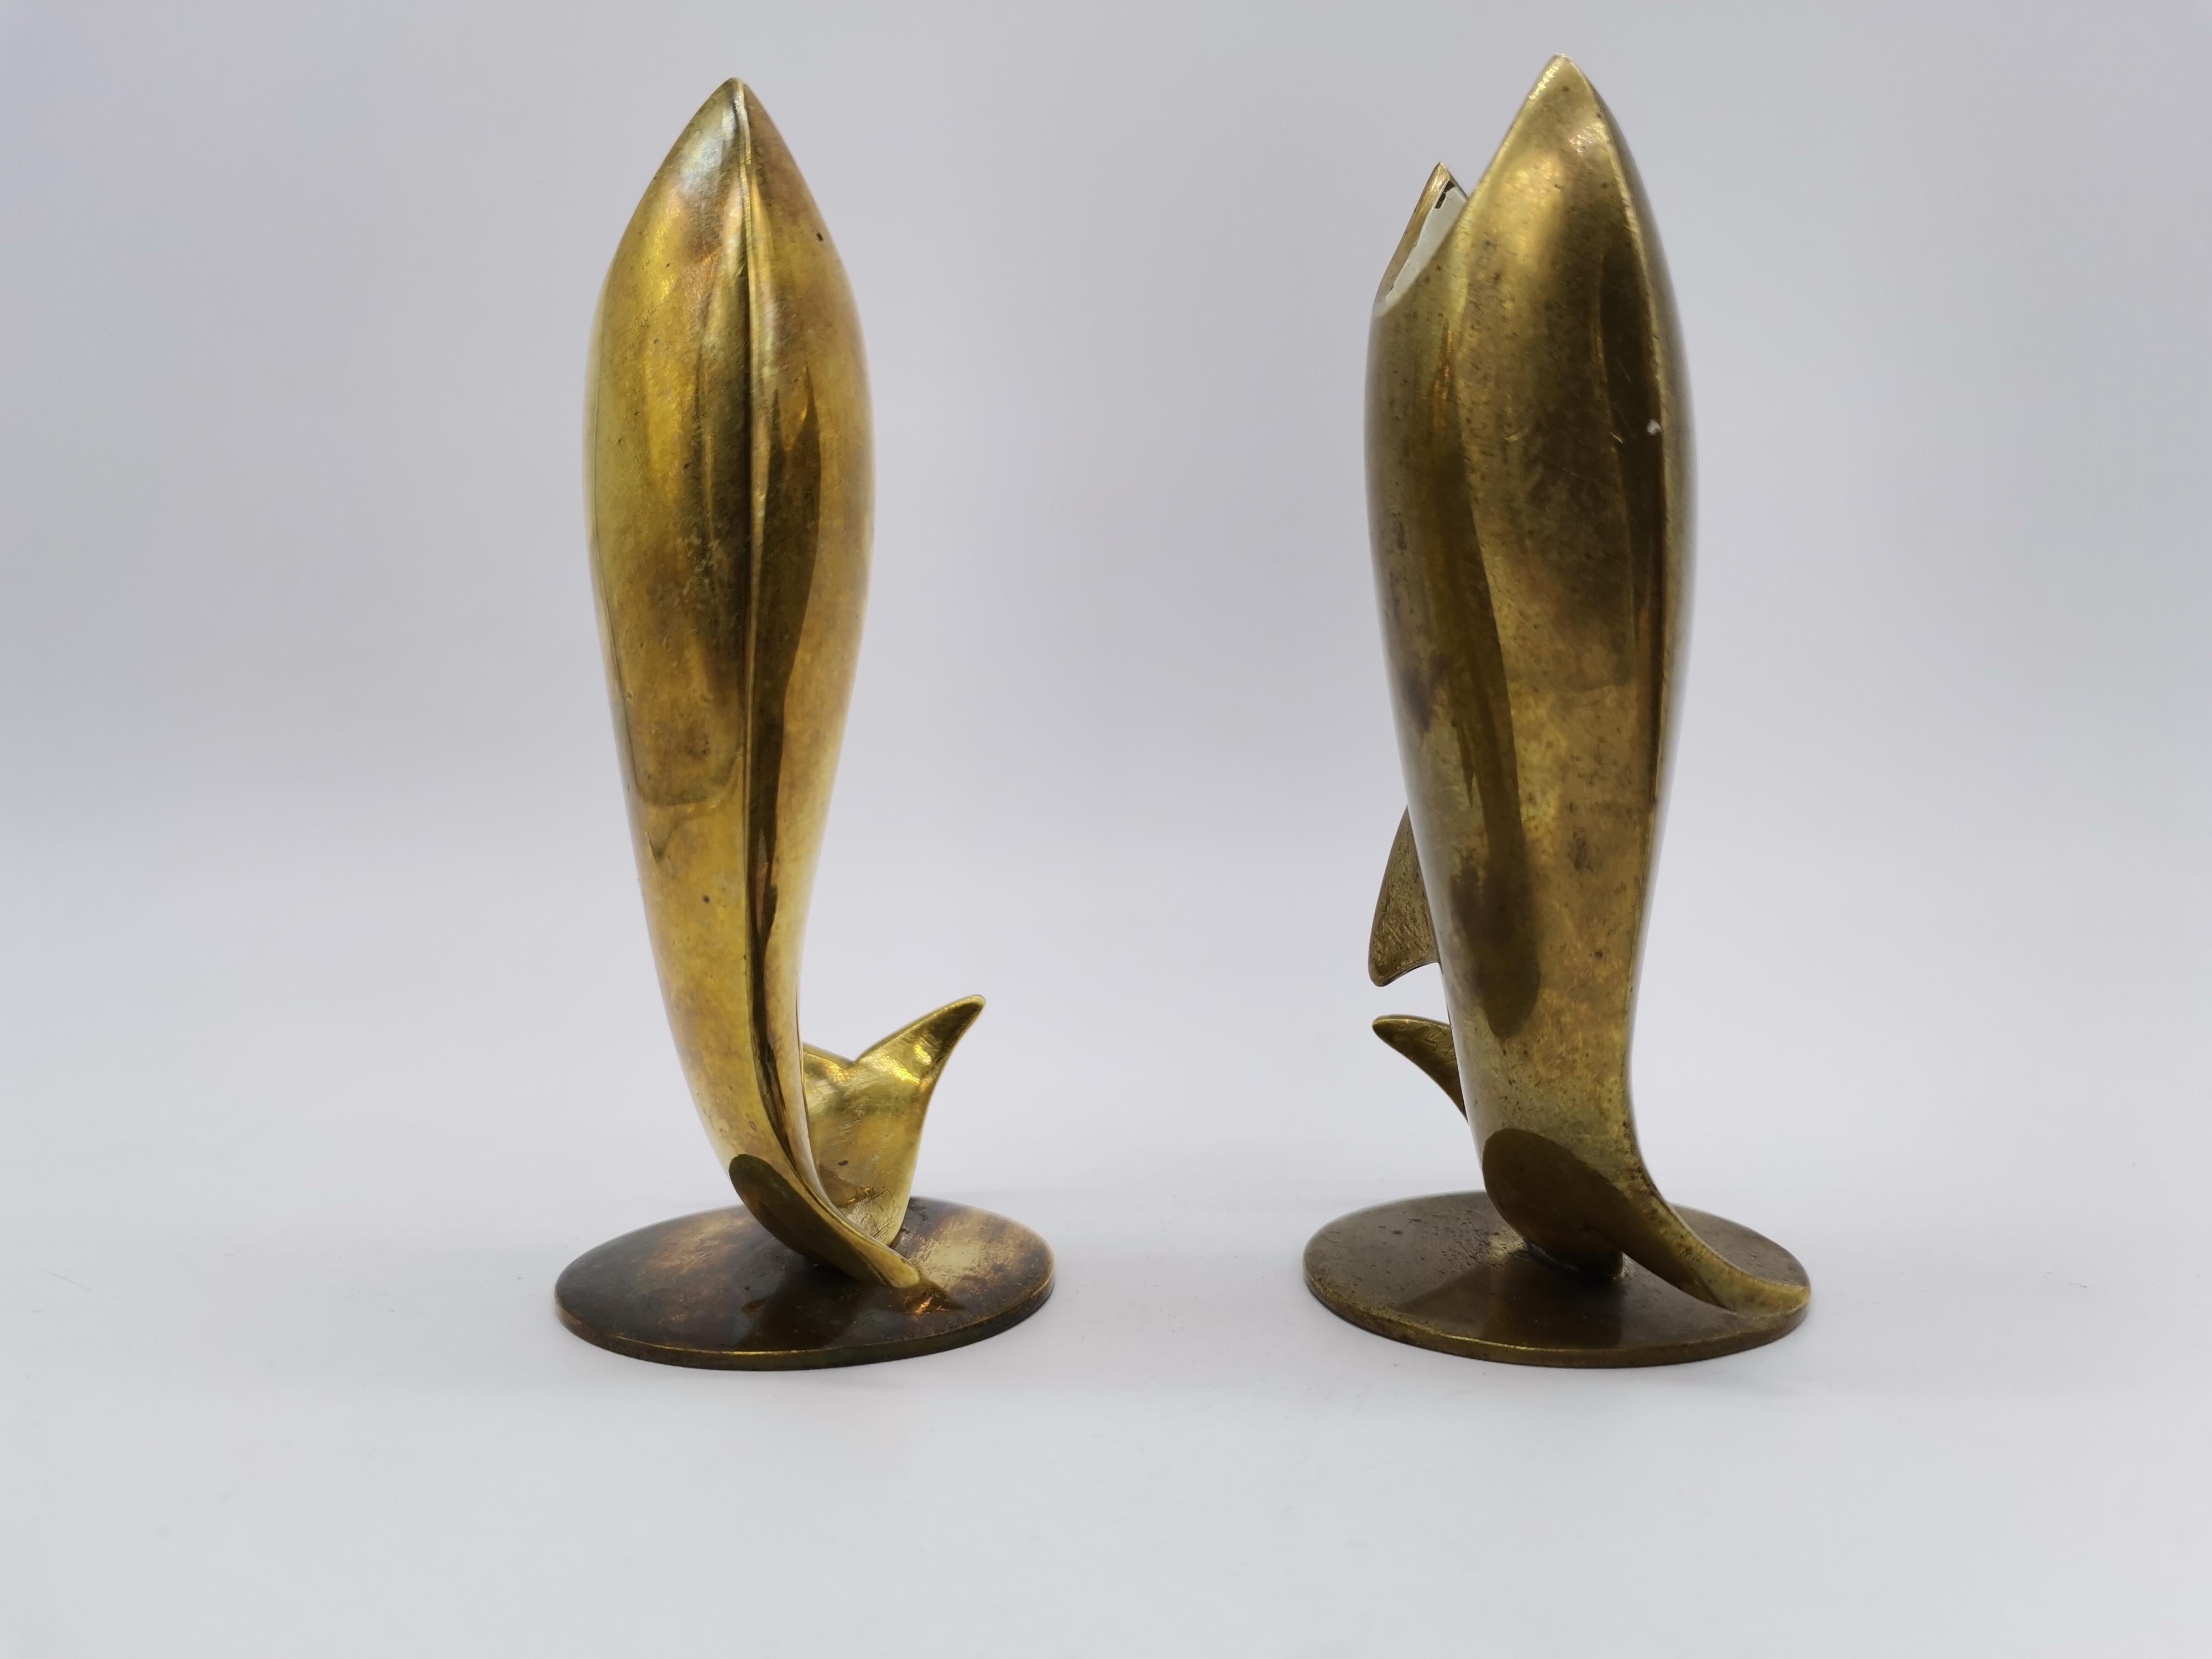 Metalwork Two Candle Holders in Fish Look, Brass, by Richard Rohac Vienna, Austria For Sale